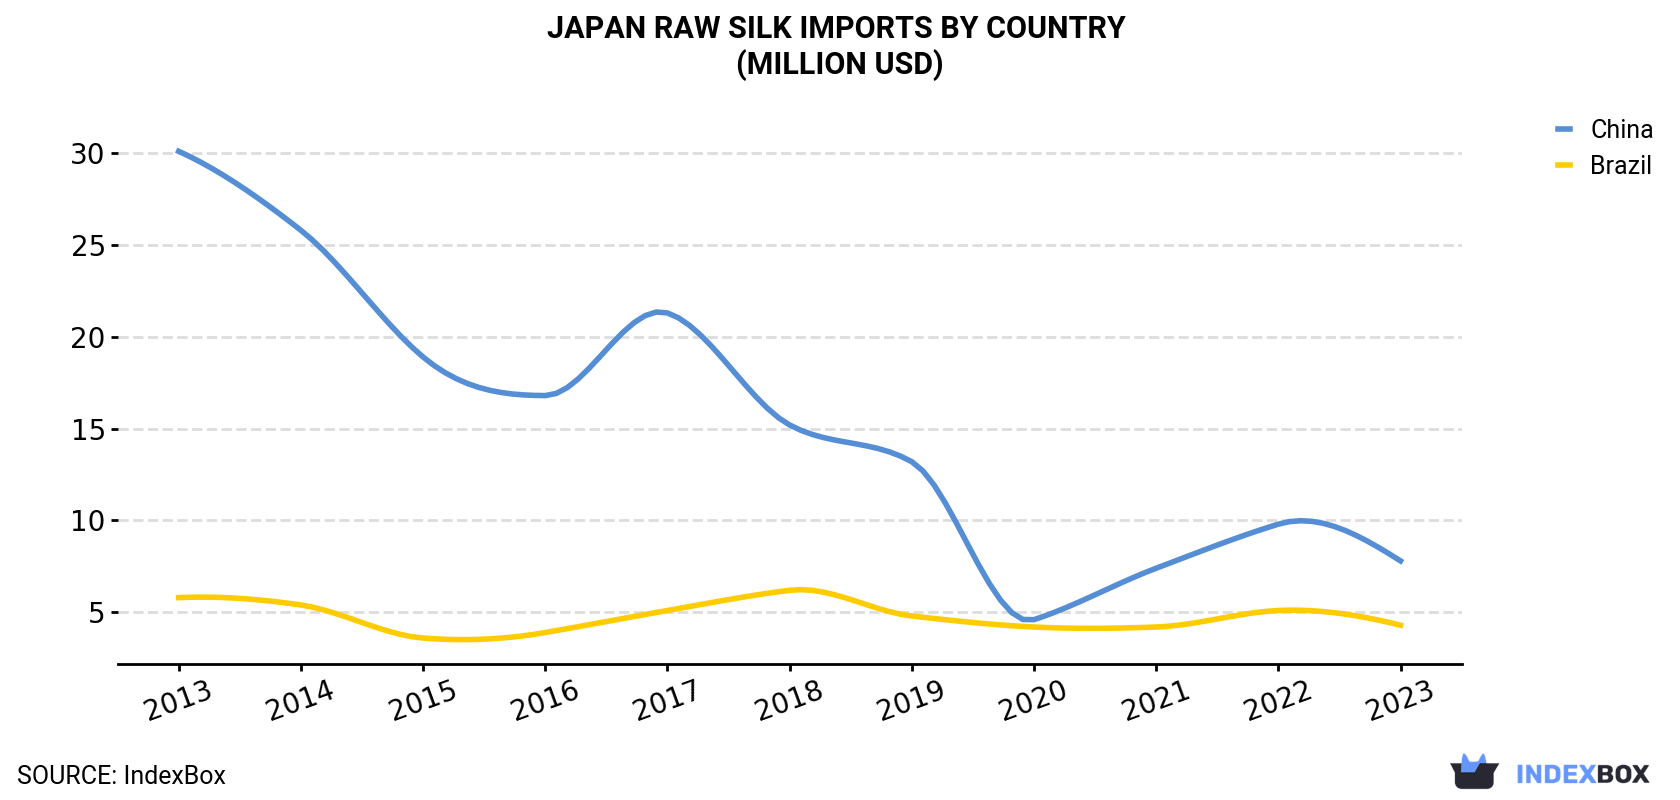 Japan Raw Silk Imports By Country (Million USD)